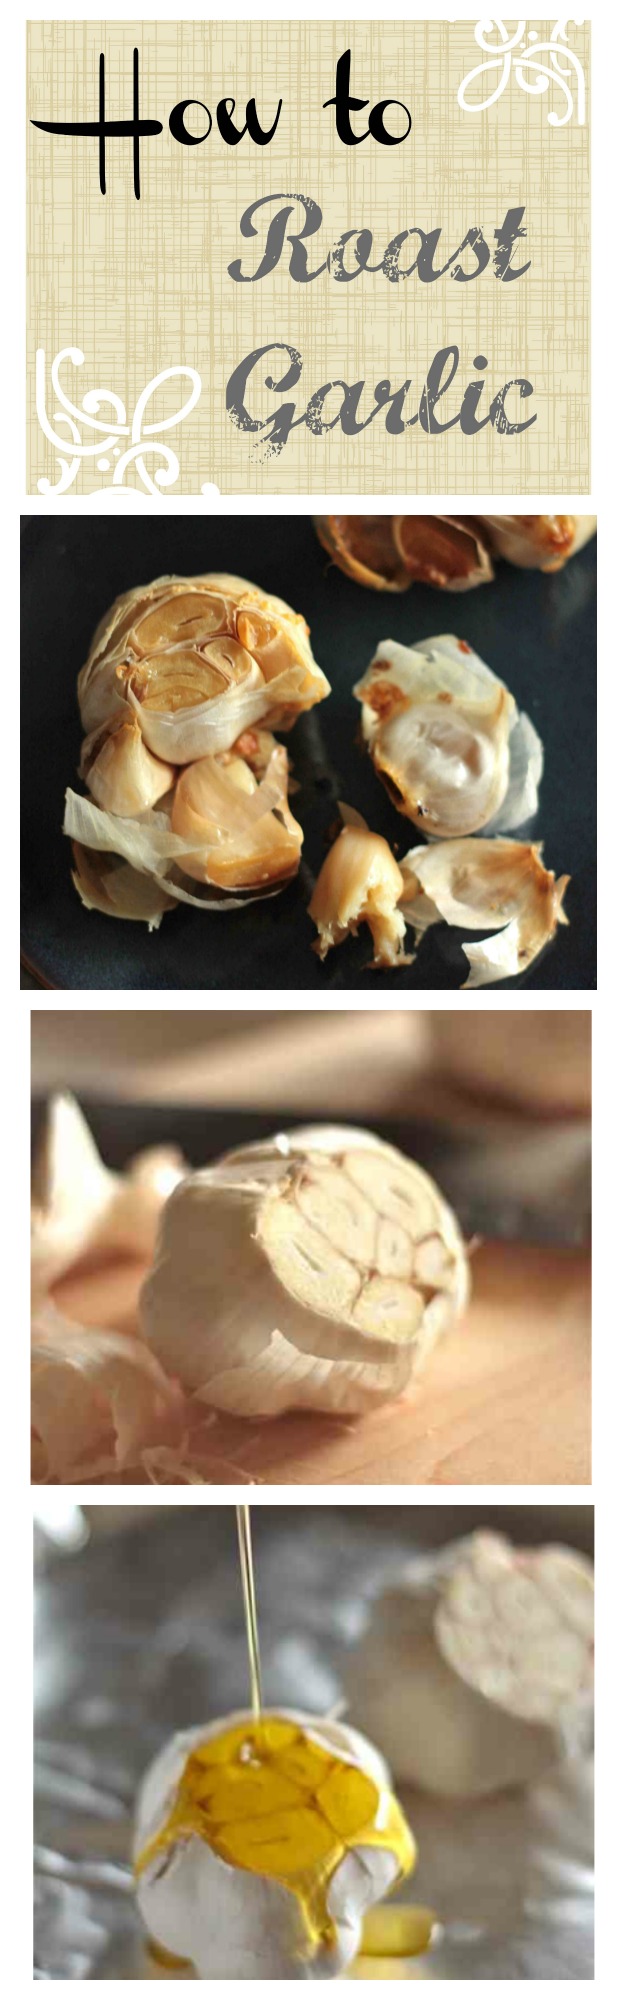 How to Roast Garlic with Step by Step Photos